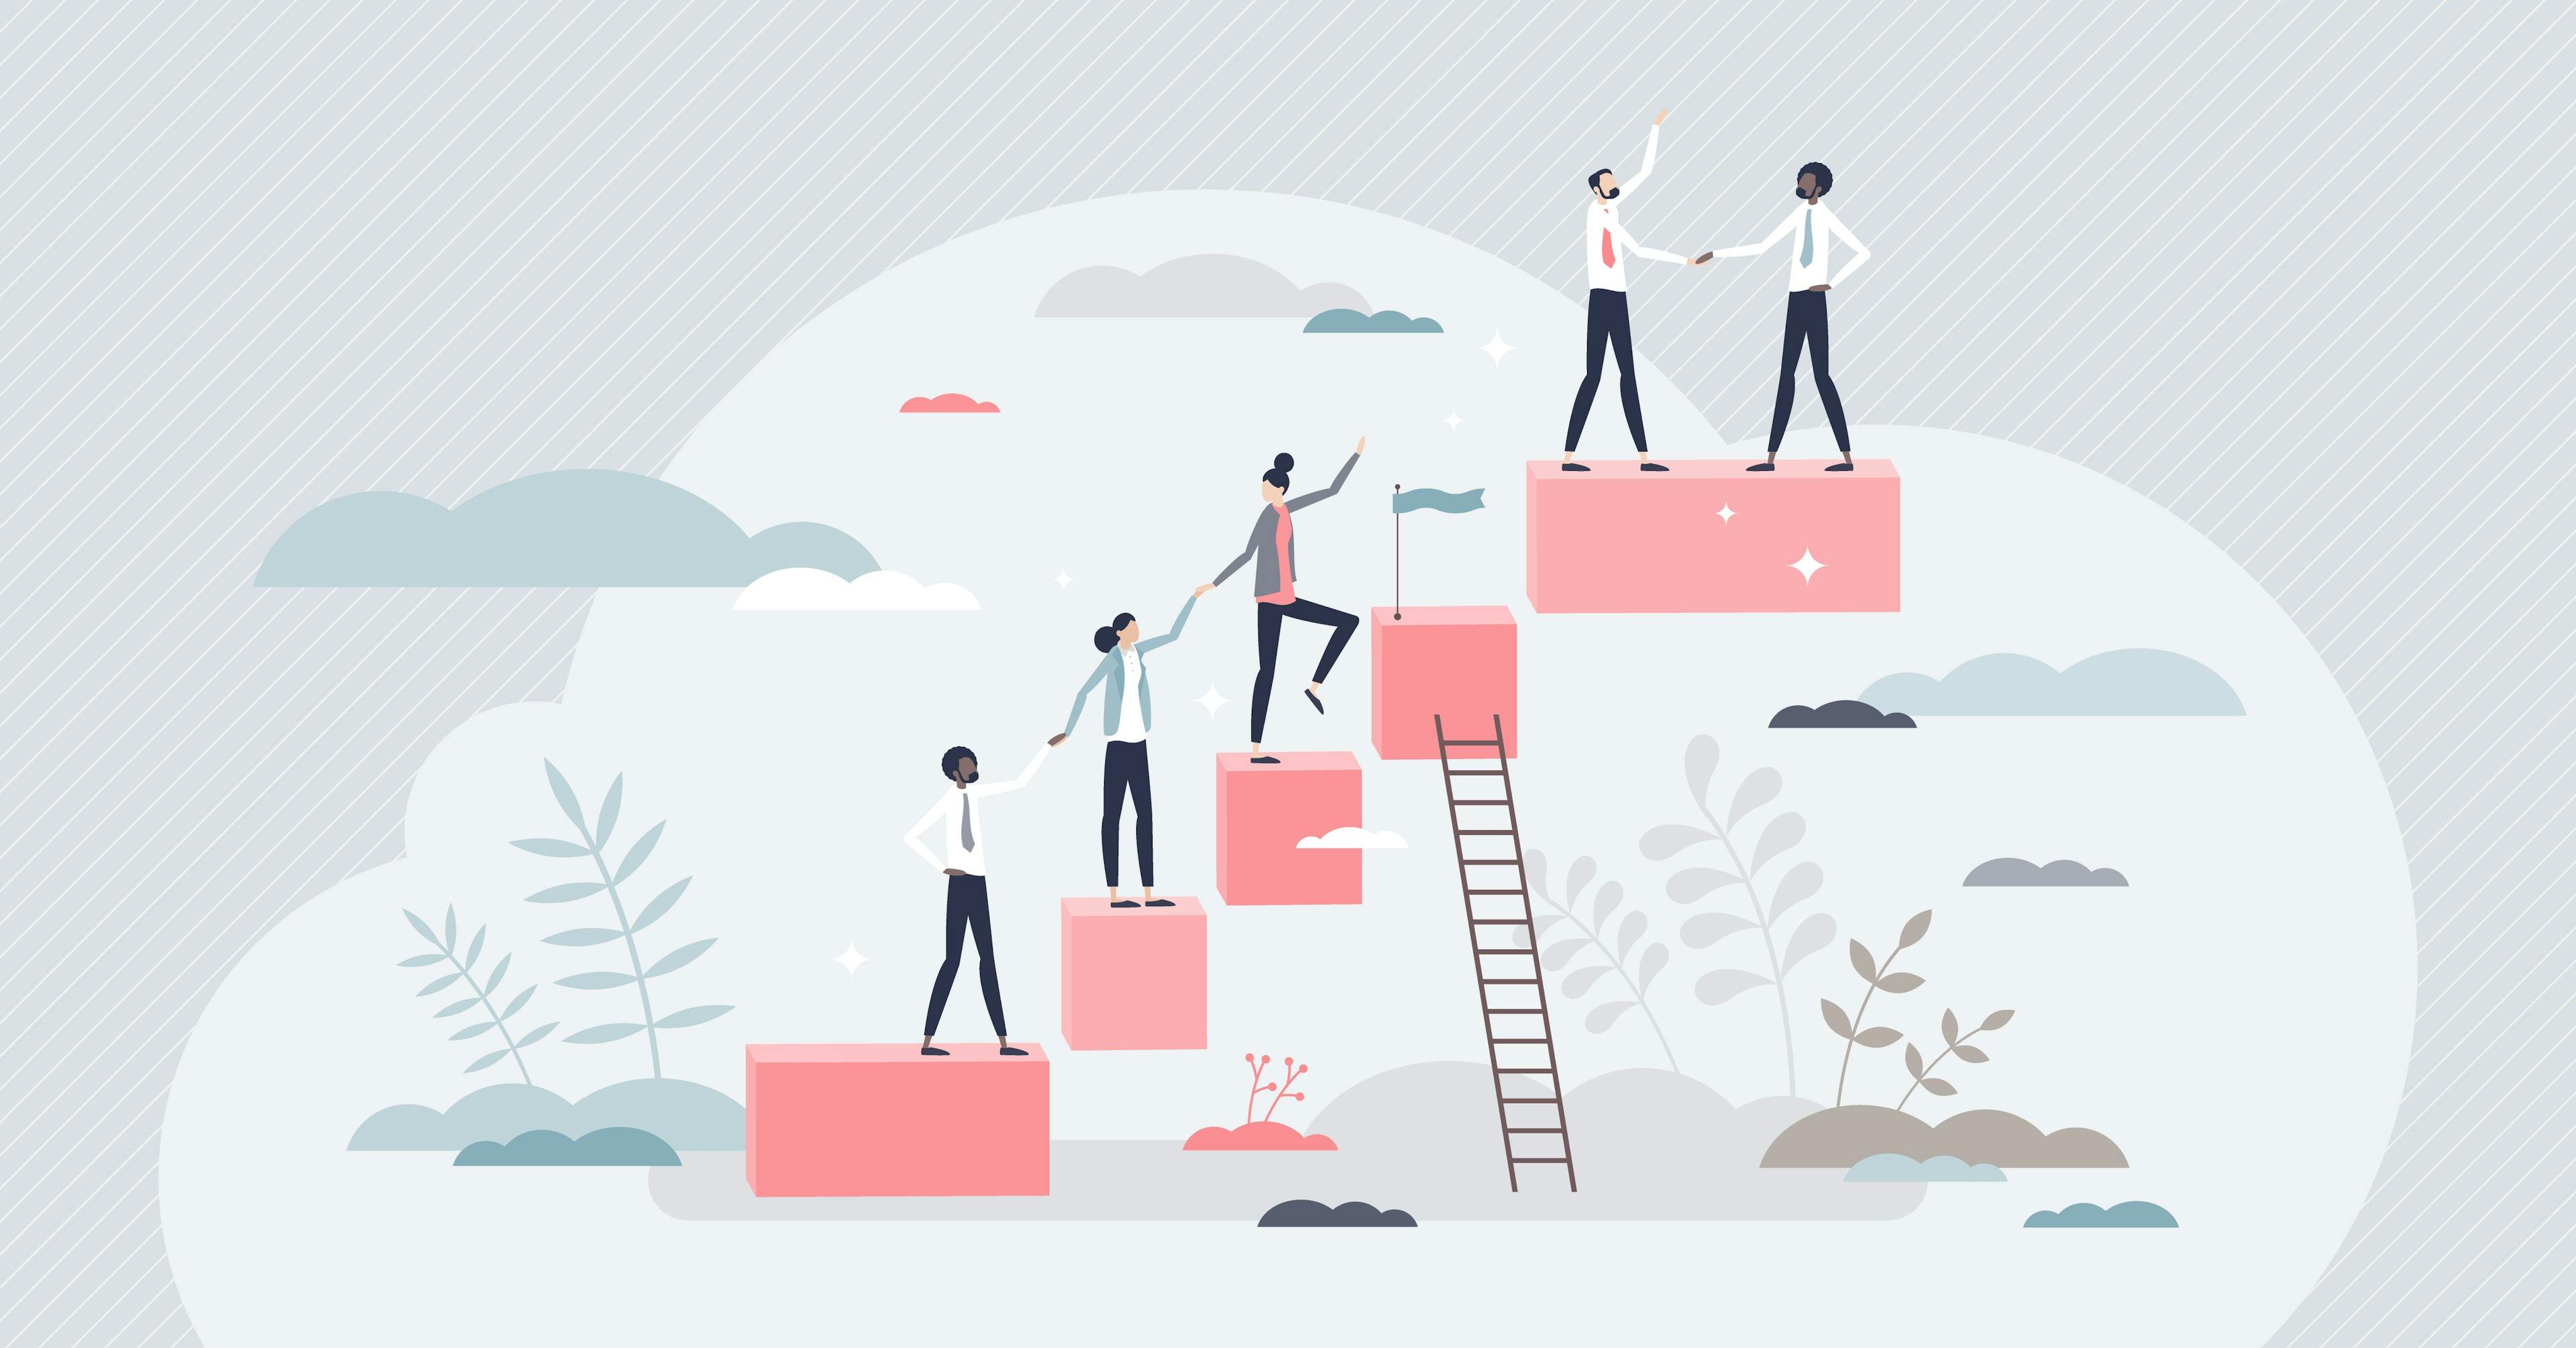 Onboarding new staff member and company work training tiny person concept. Employee career ladders and job guide or task explanation steps vector illustration. Manager qualification or growth process.